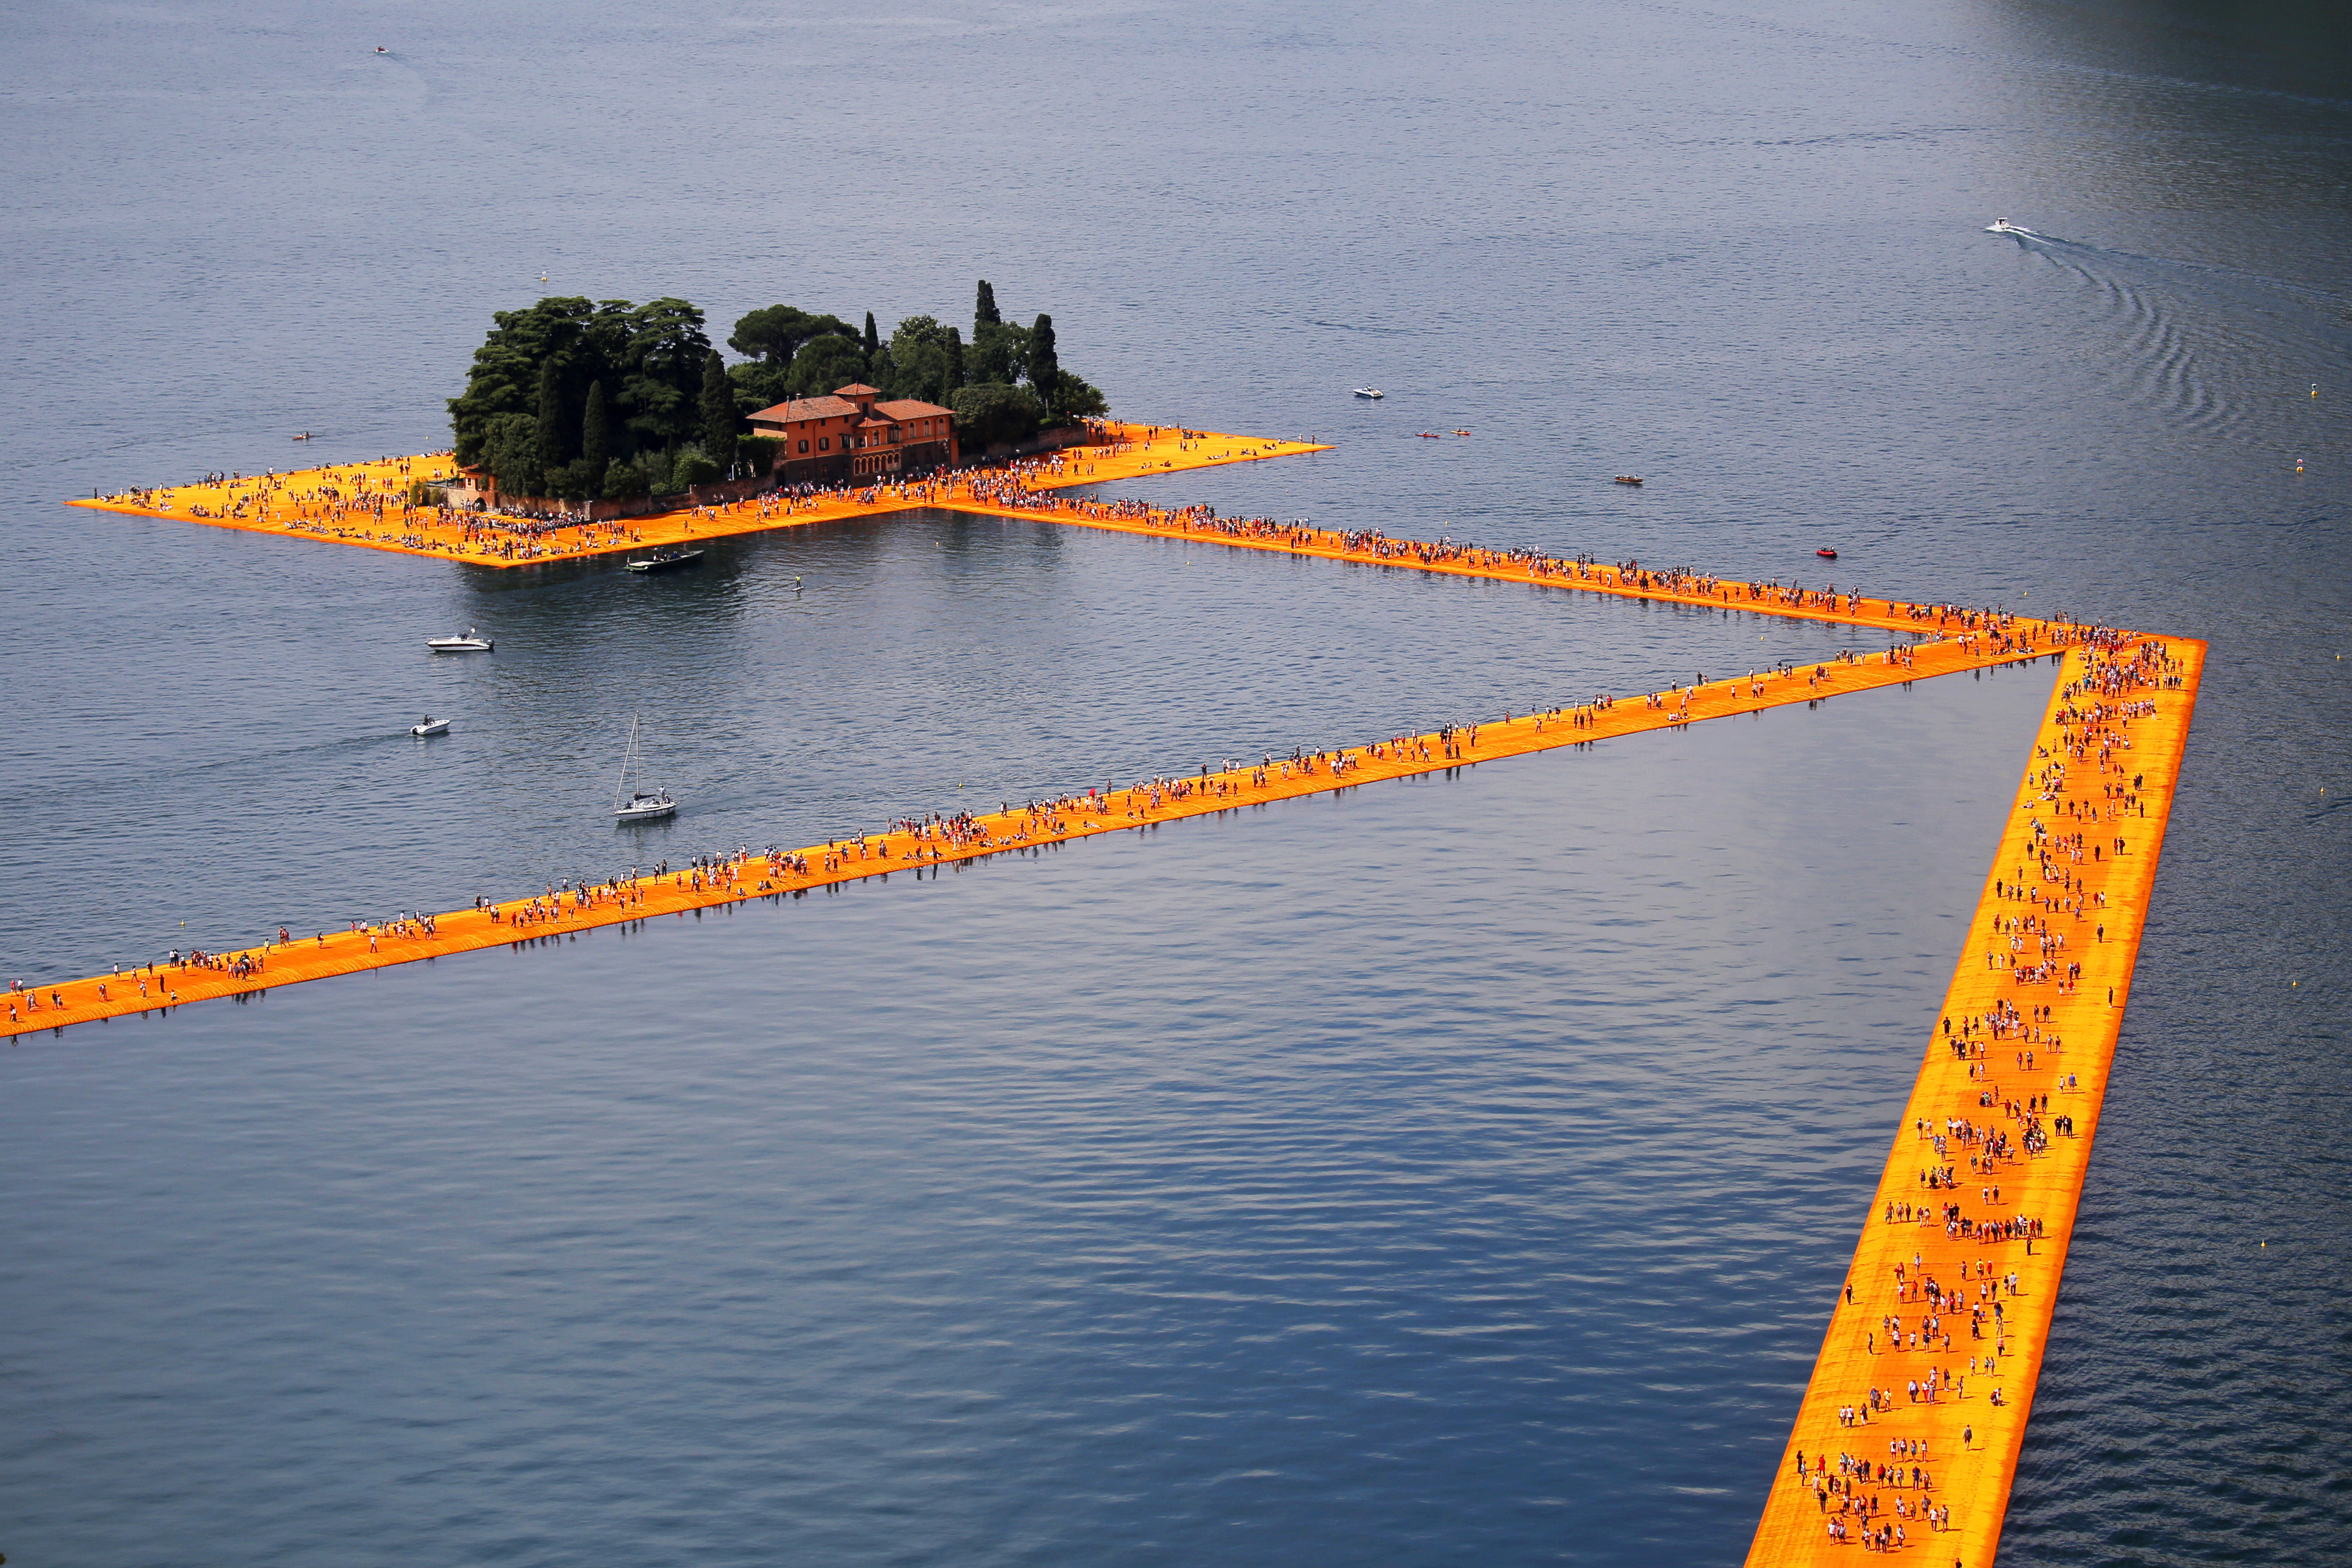 People walk on the monumental installation entitled 'The Floating Piers' created by artist Christo Vladimirov Javacheff on Iseo Lake, in northern Italy, on June 18, 2016. Some 200,000 floating cubes create a 3-kilometers runway connecting the village of Sulzano to the small island of Monte Isola on the Iseo Lake for a 16-day outdoor installation opening today. / AFP PHOTO / MARCO BERTORELLO / RESTRICTED TO EDITORIAL USE - MANDATORY MENTION OF THE ARTIST UPON PUBLICATION - TO ILLUSTRATE THE EVENT AS SPECIFIED IN THE CAPTION